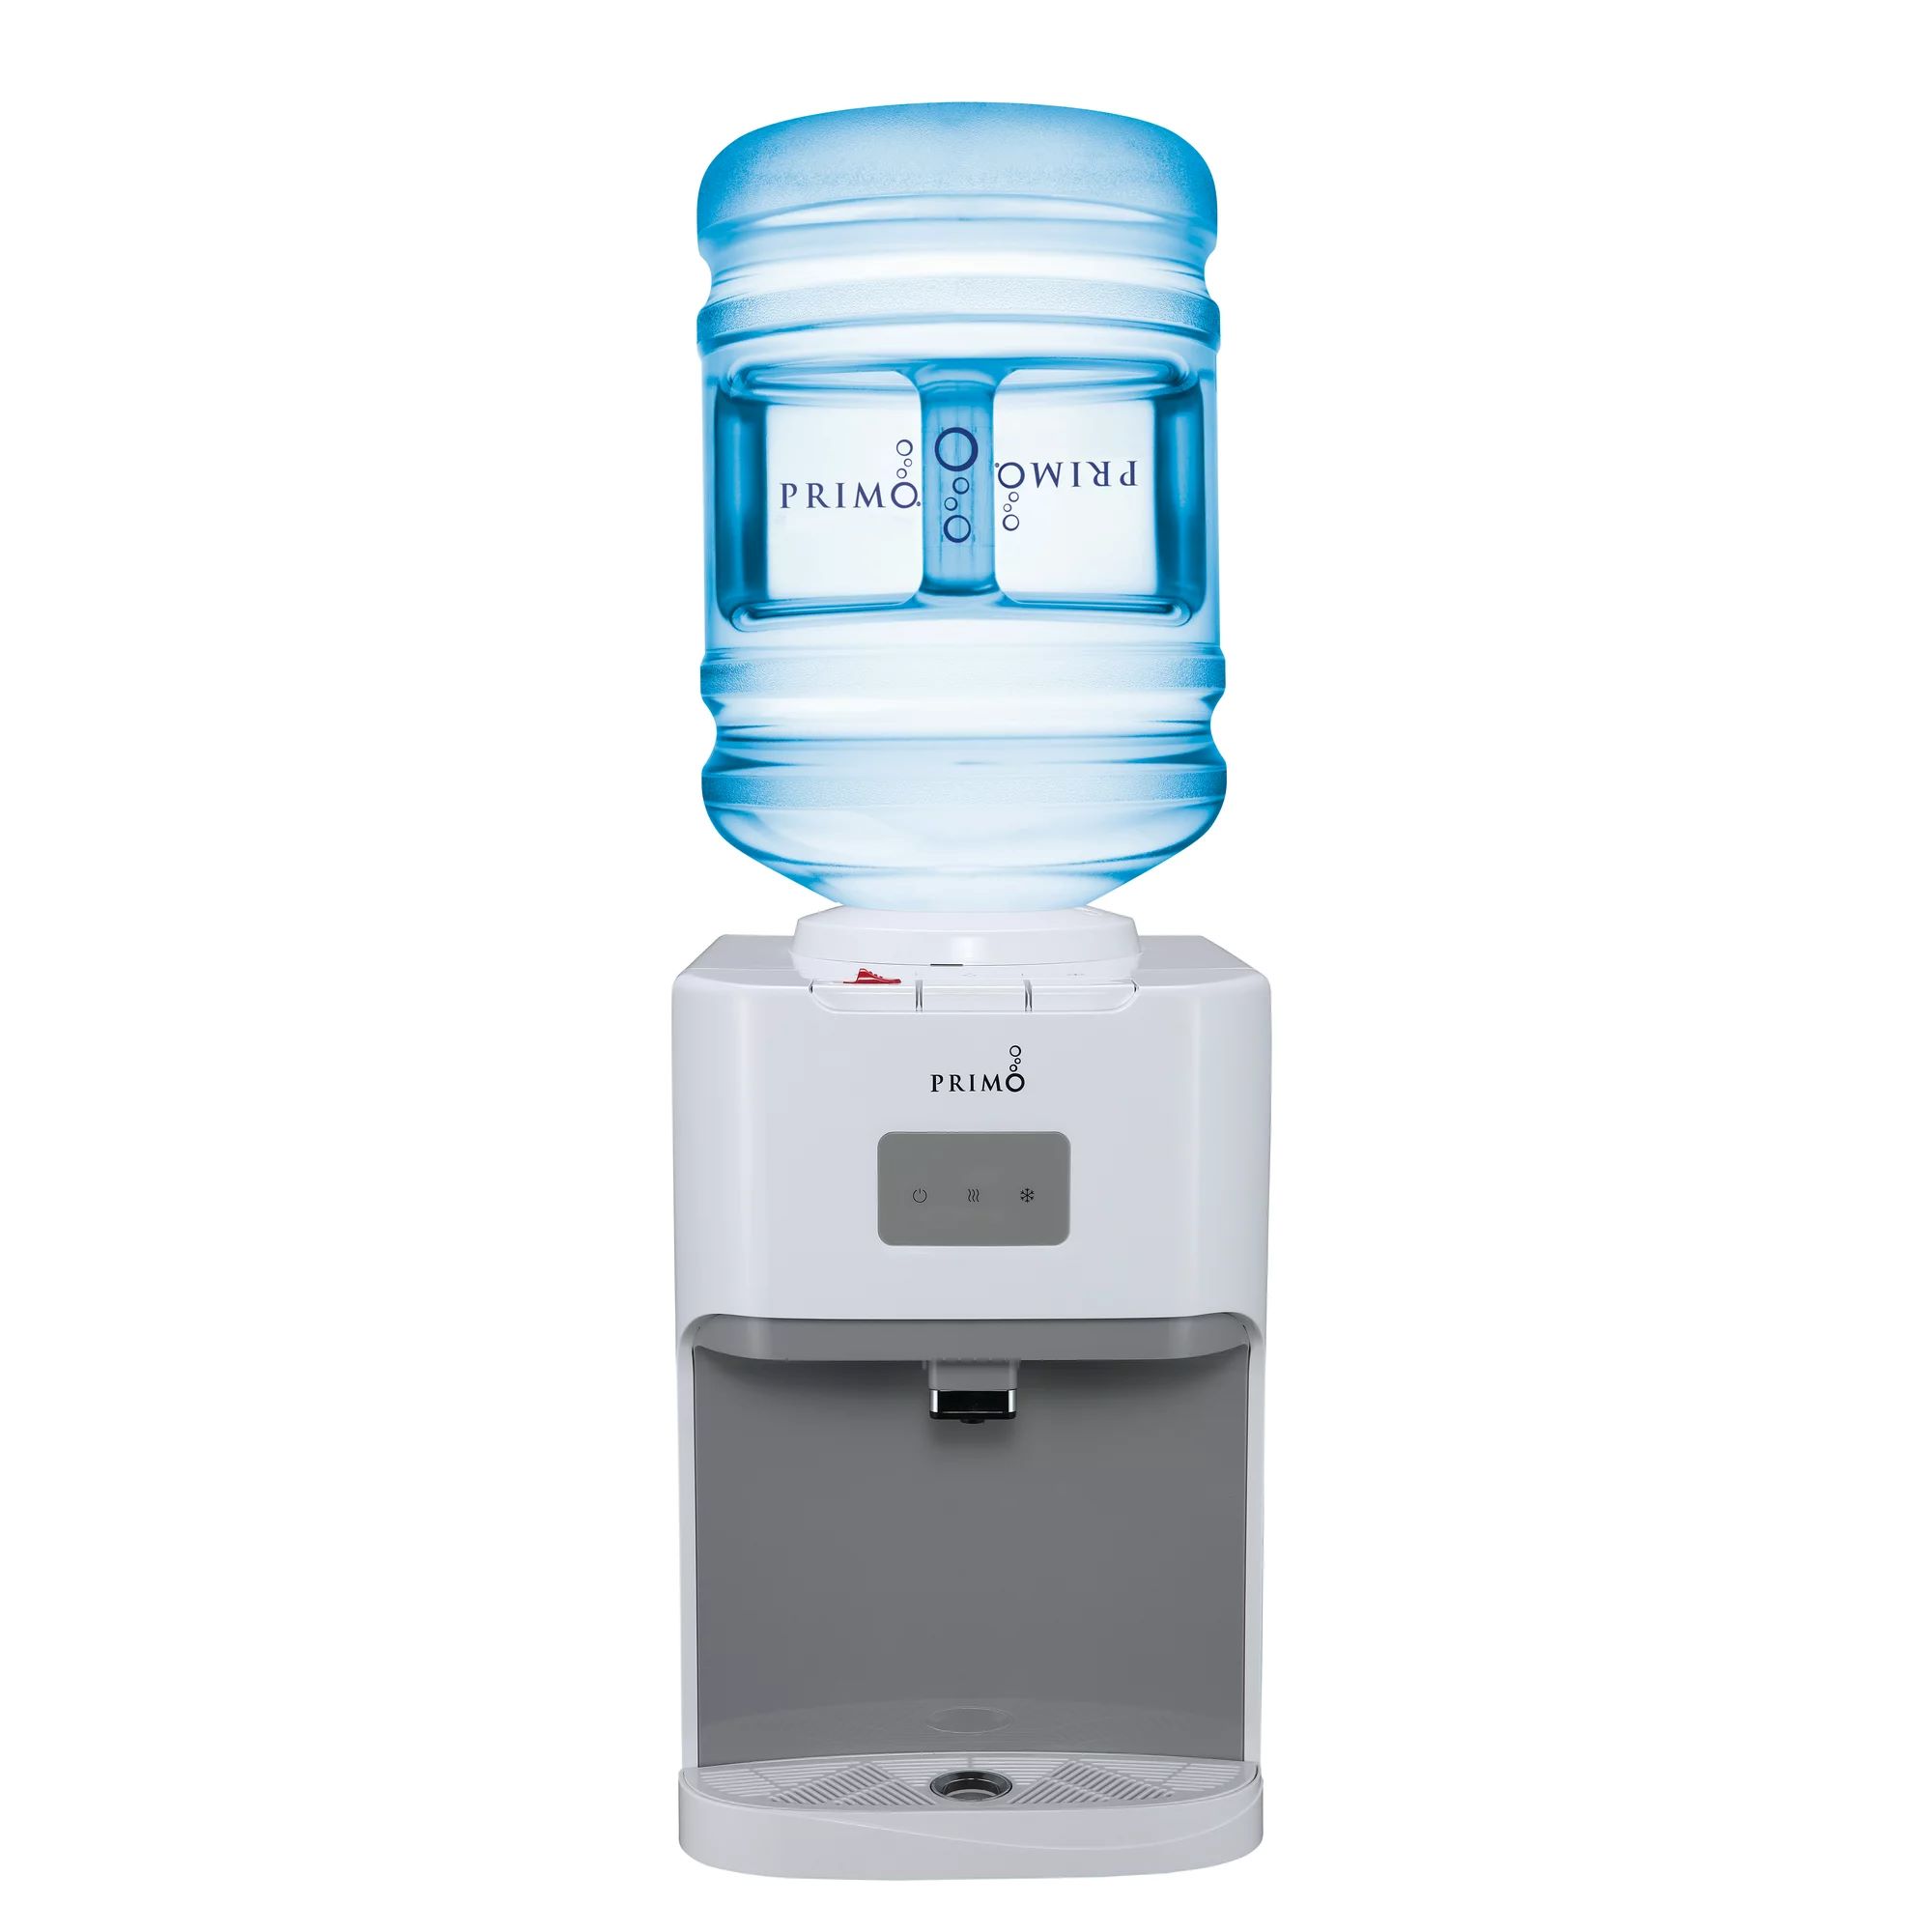 How To Clean Primo Water Dispenser Top Load